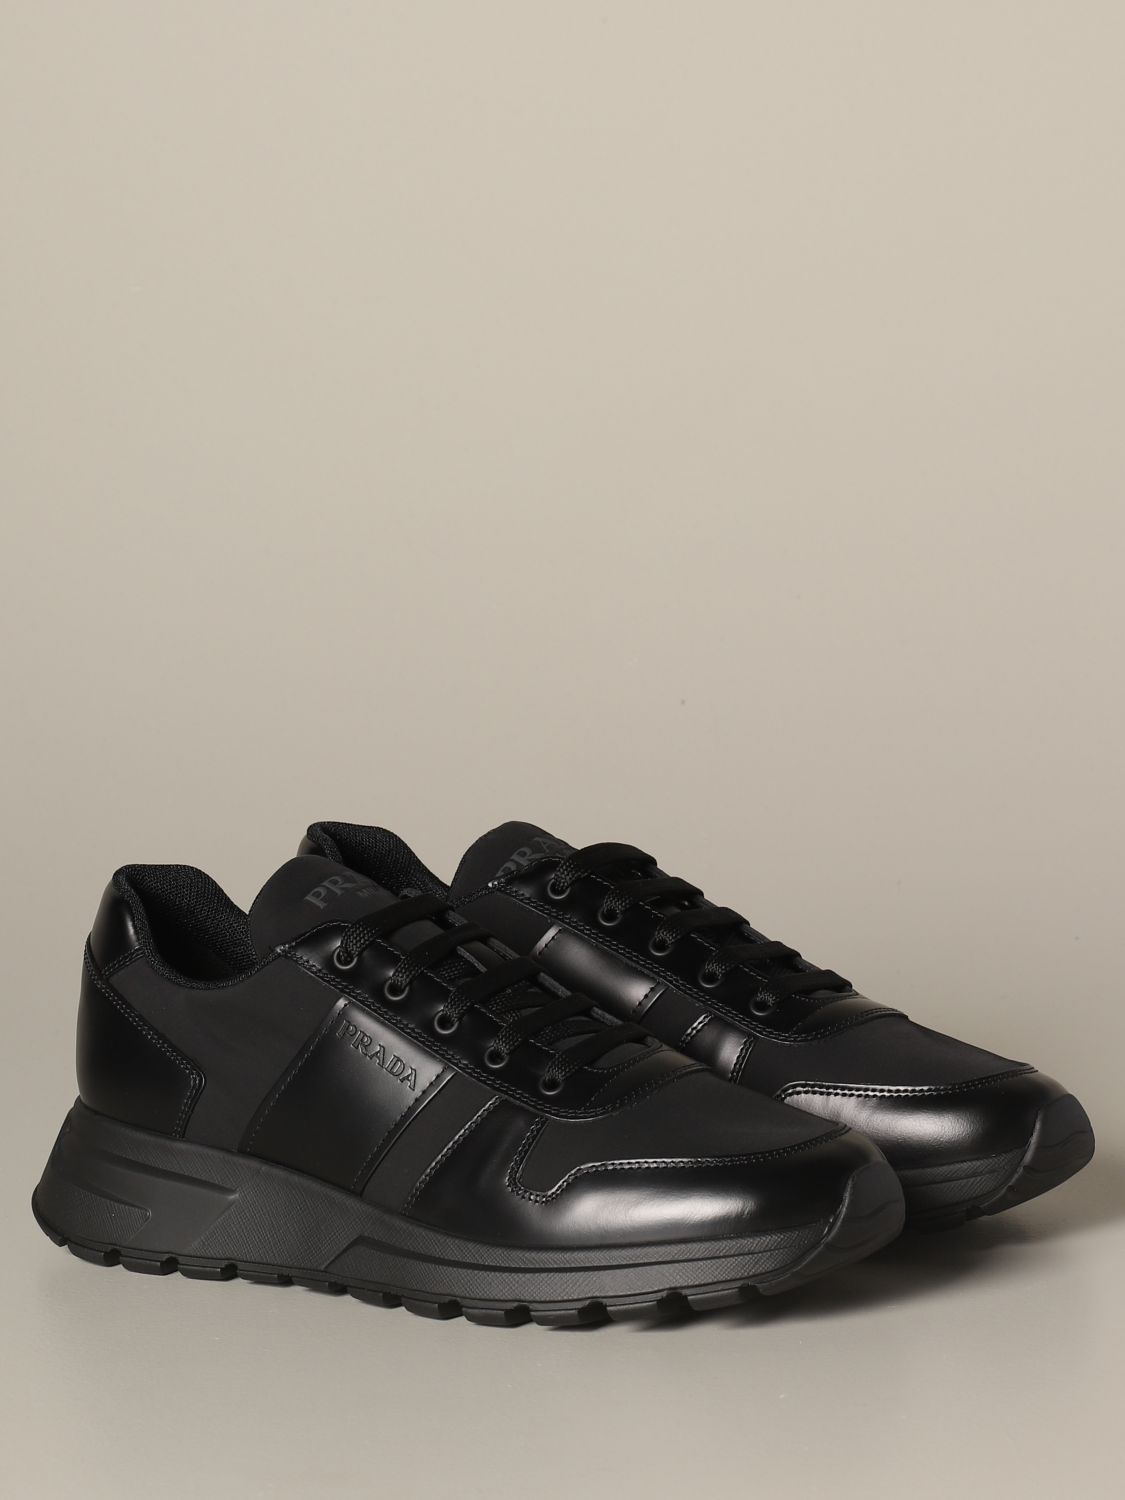 PRADA: Prax 01 sneakers in technical fabric and leather | Sneakers 